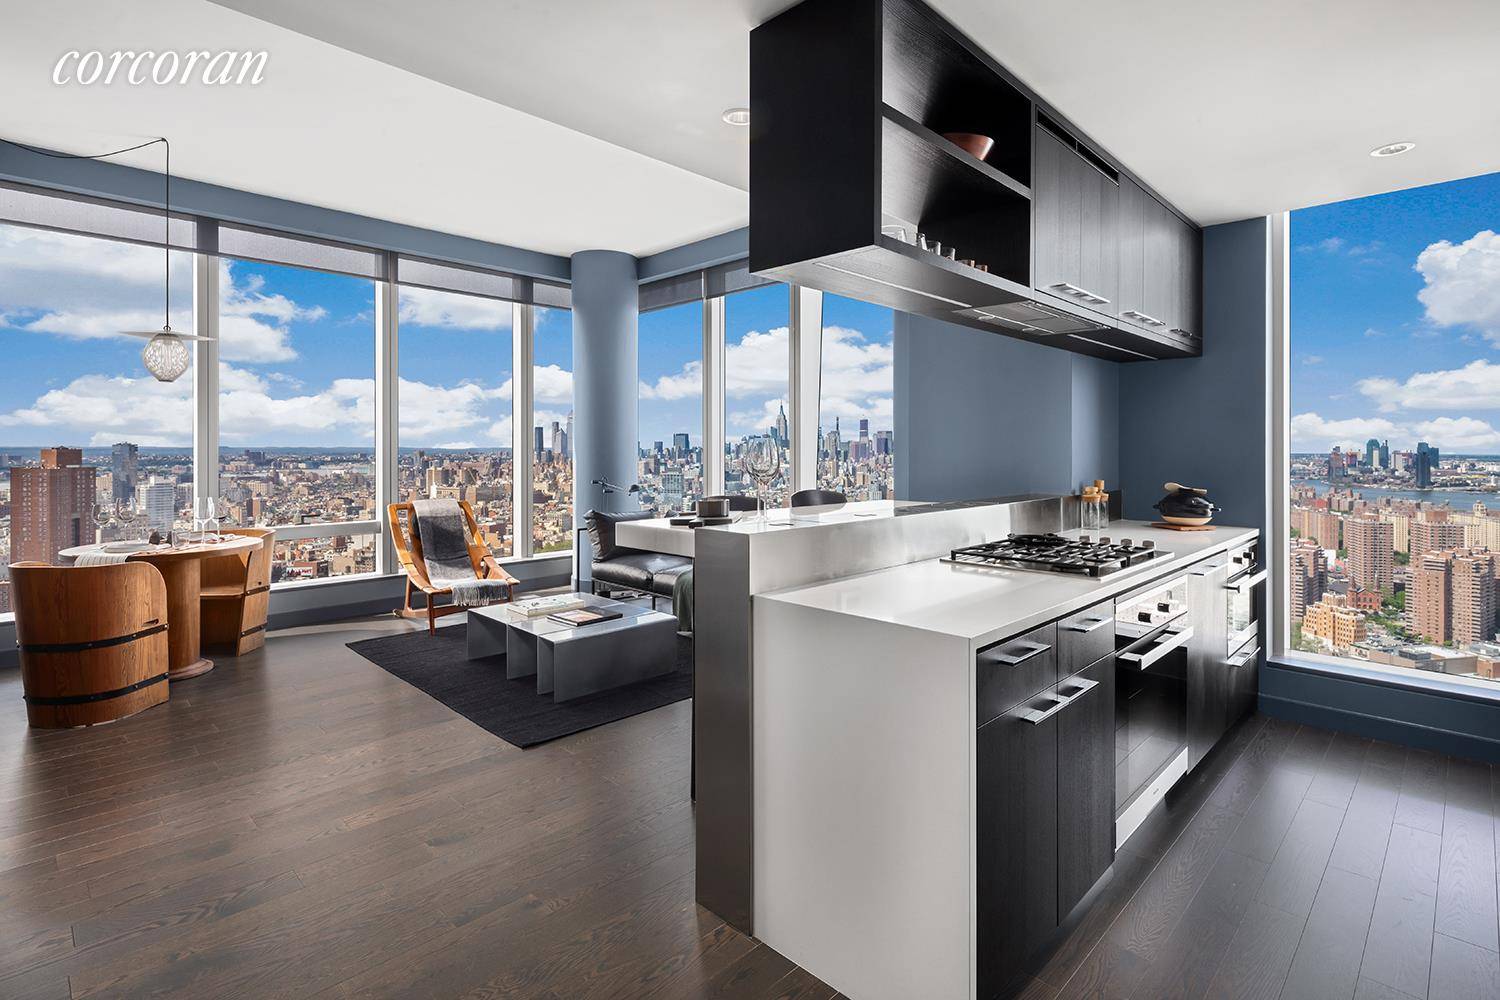 Virtual Tours of One Manhattan Square residences are available as well as limited in person showings, strictly by appointment only.